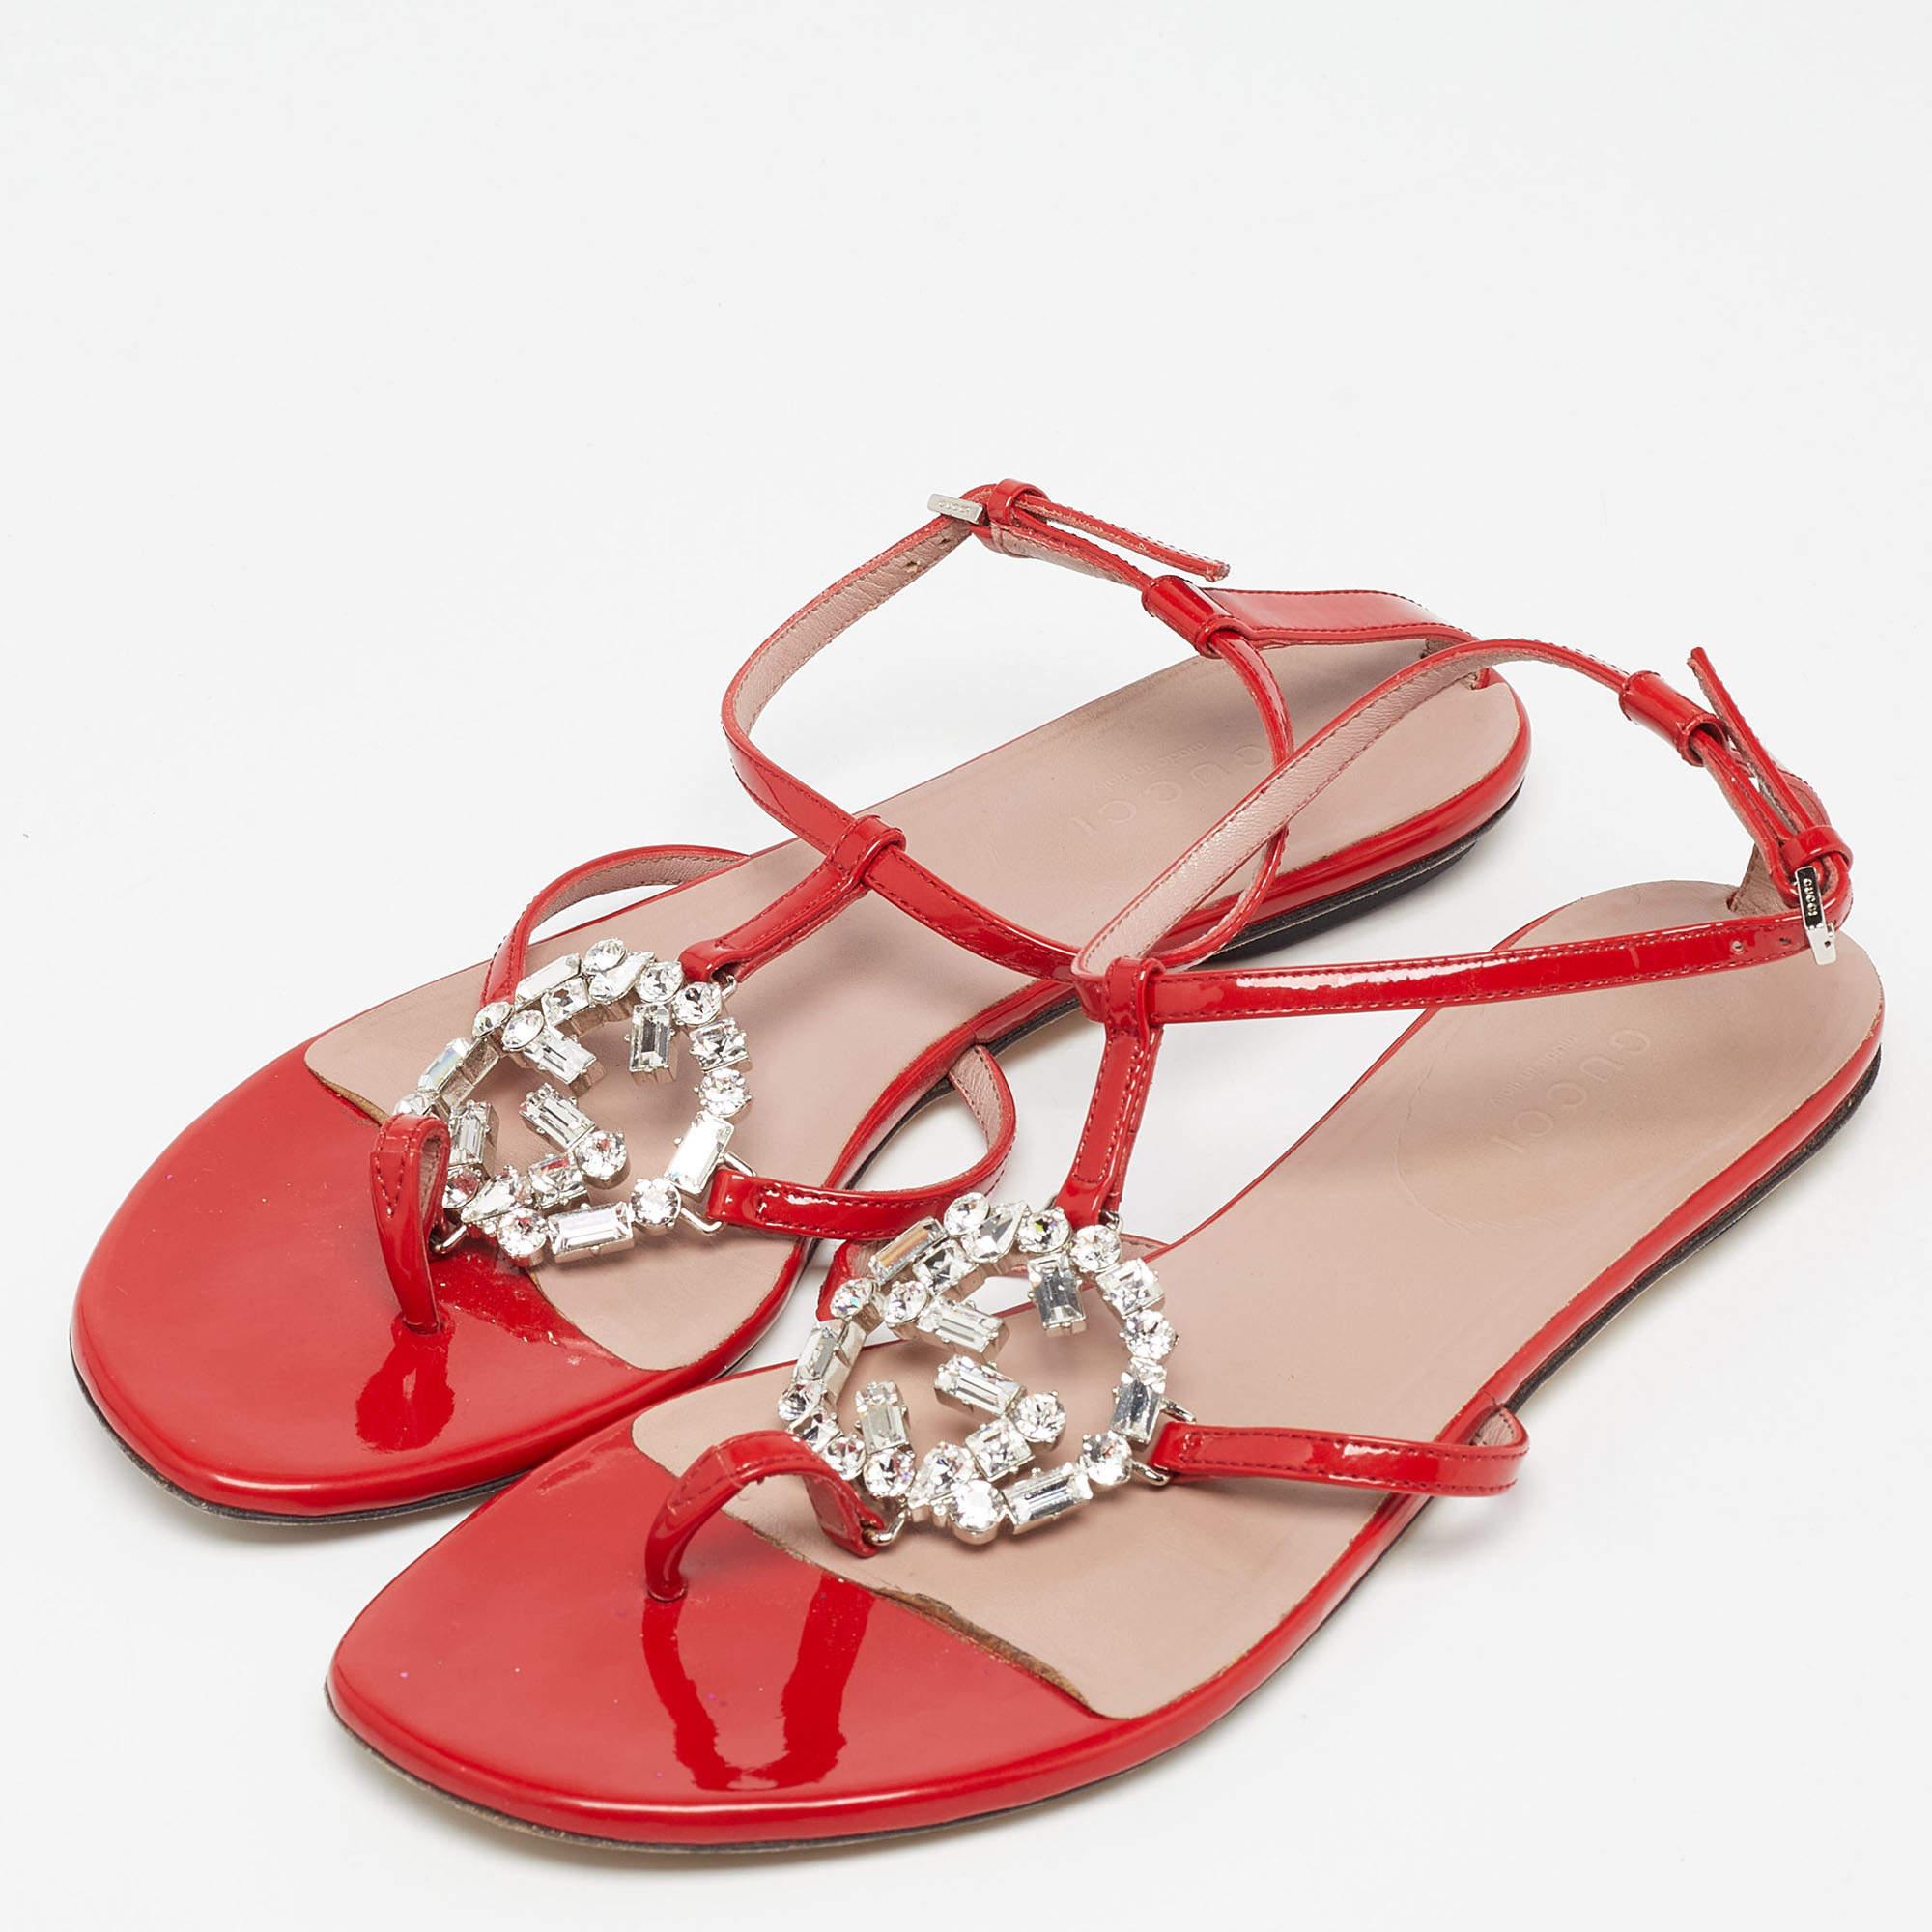 Coming from the house of Gucci are these uber-chic patent leather sandals that will make your feet dazzle. Crafted from red, the luxurious ankle-strap flats have beautiful, crystal-embellished GG interlockings on the vamps. Buckle closures and